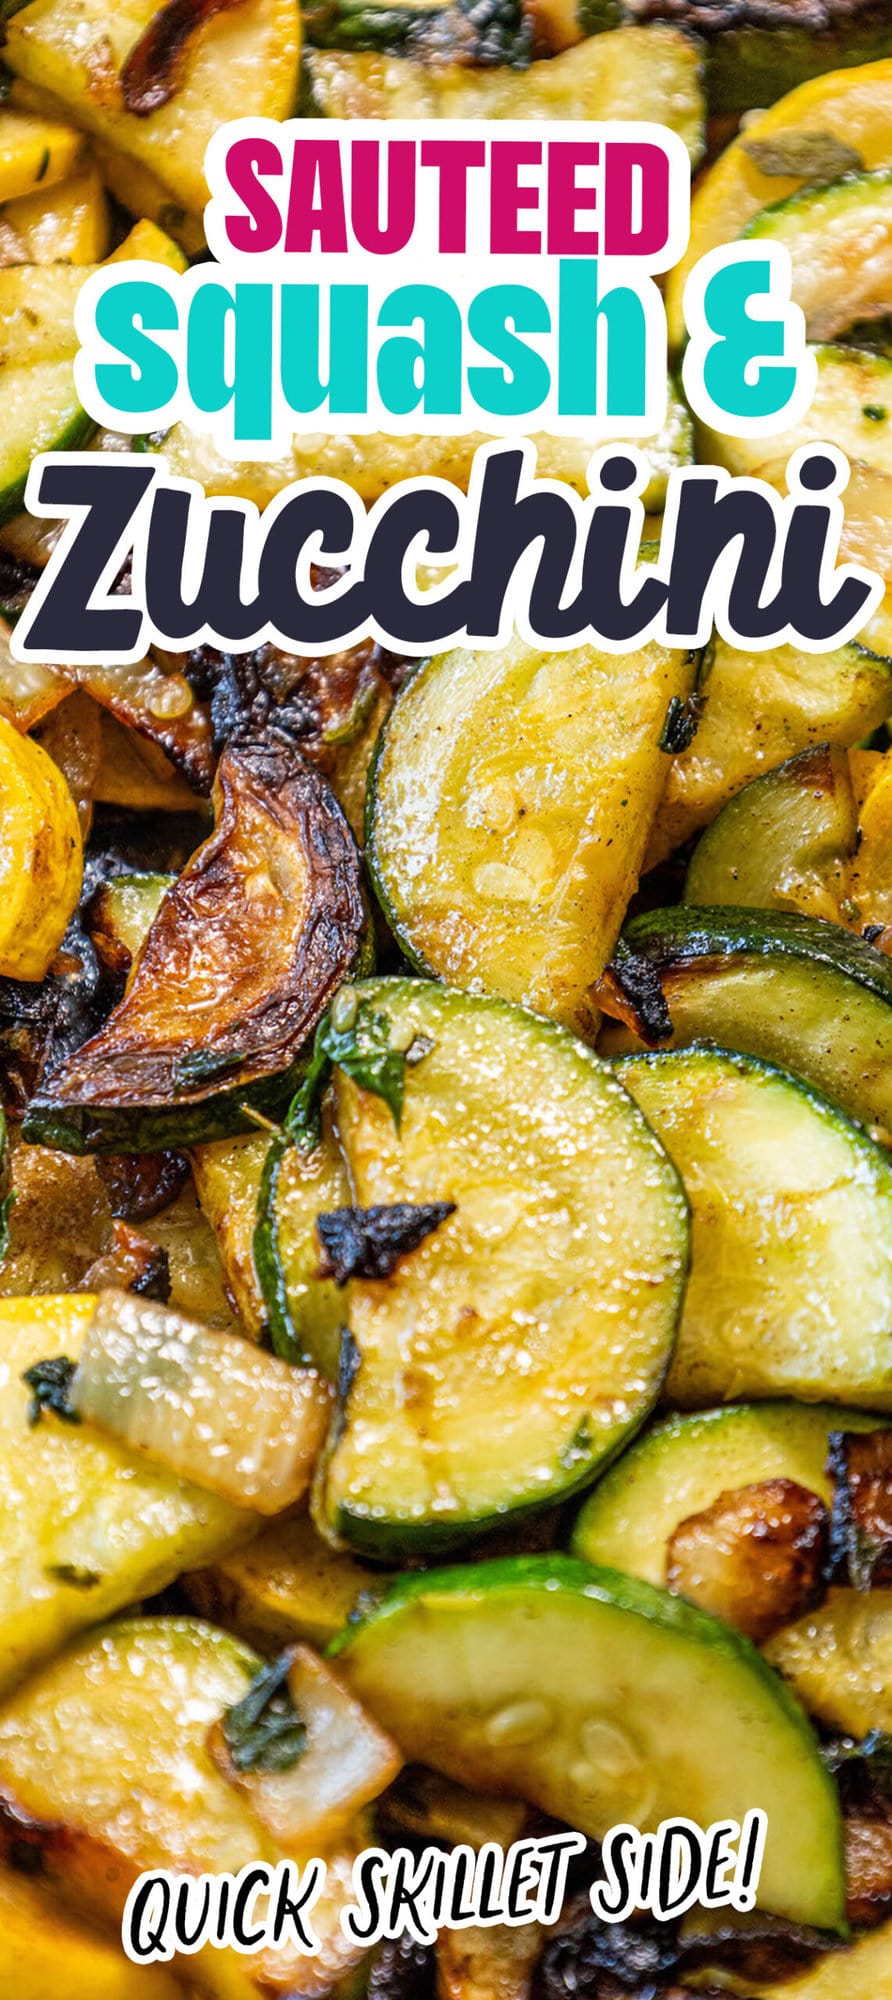 Quick skillet side dish featuring sauteed zucchini and squash.